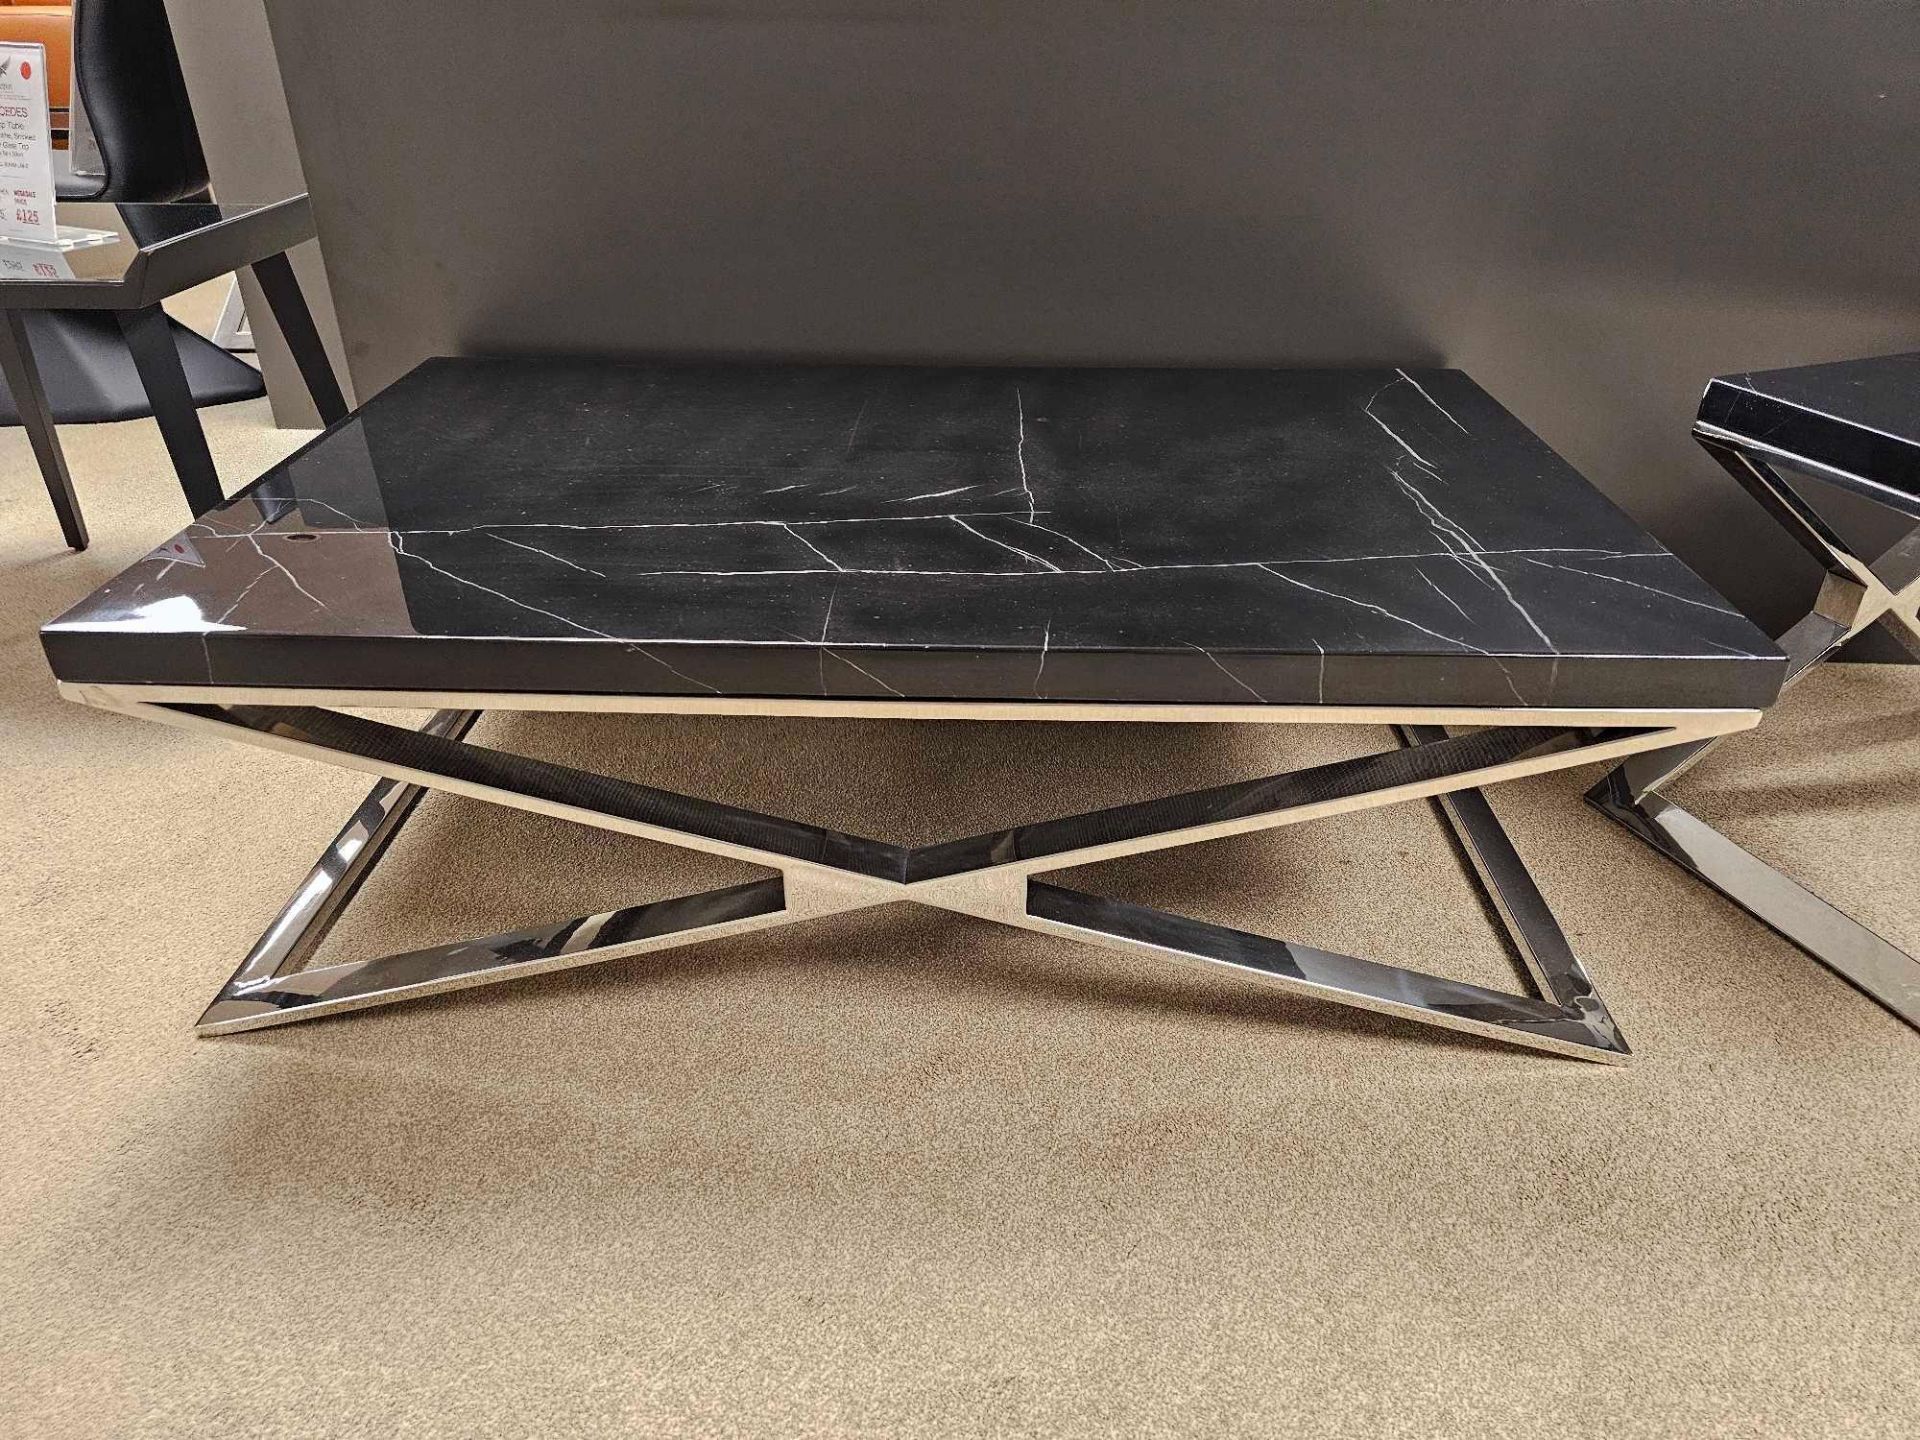 Zephyr Coffee Table by Kesterport This coffee Table has a classic frame design which we have updated - Image 2 of 7